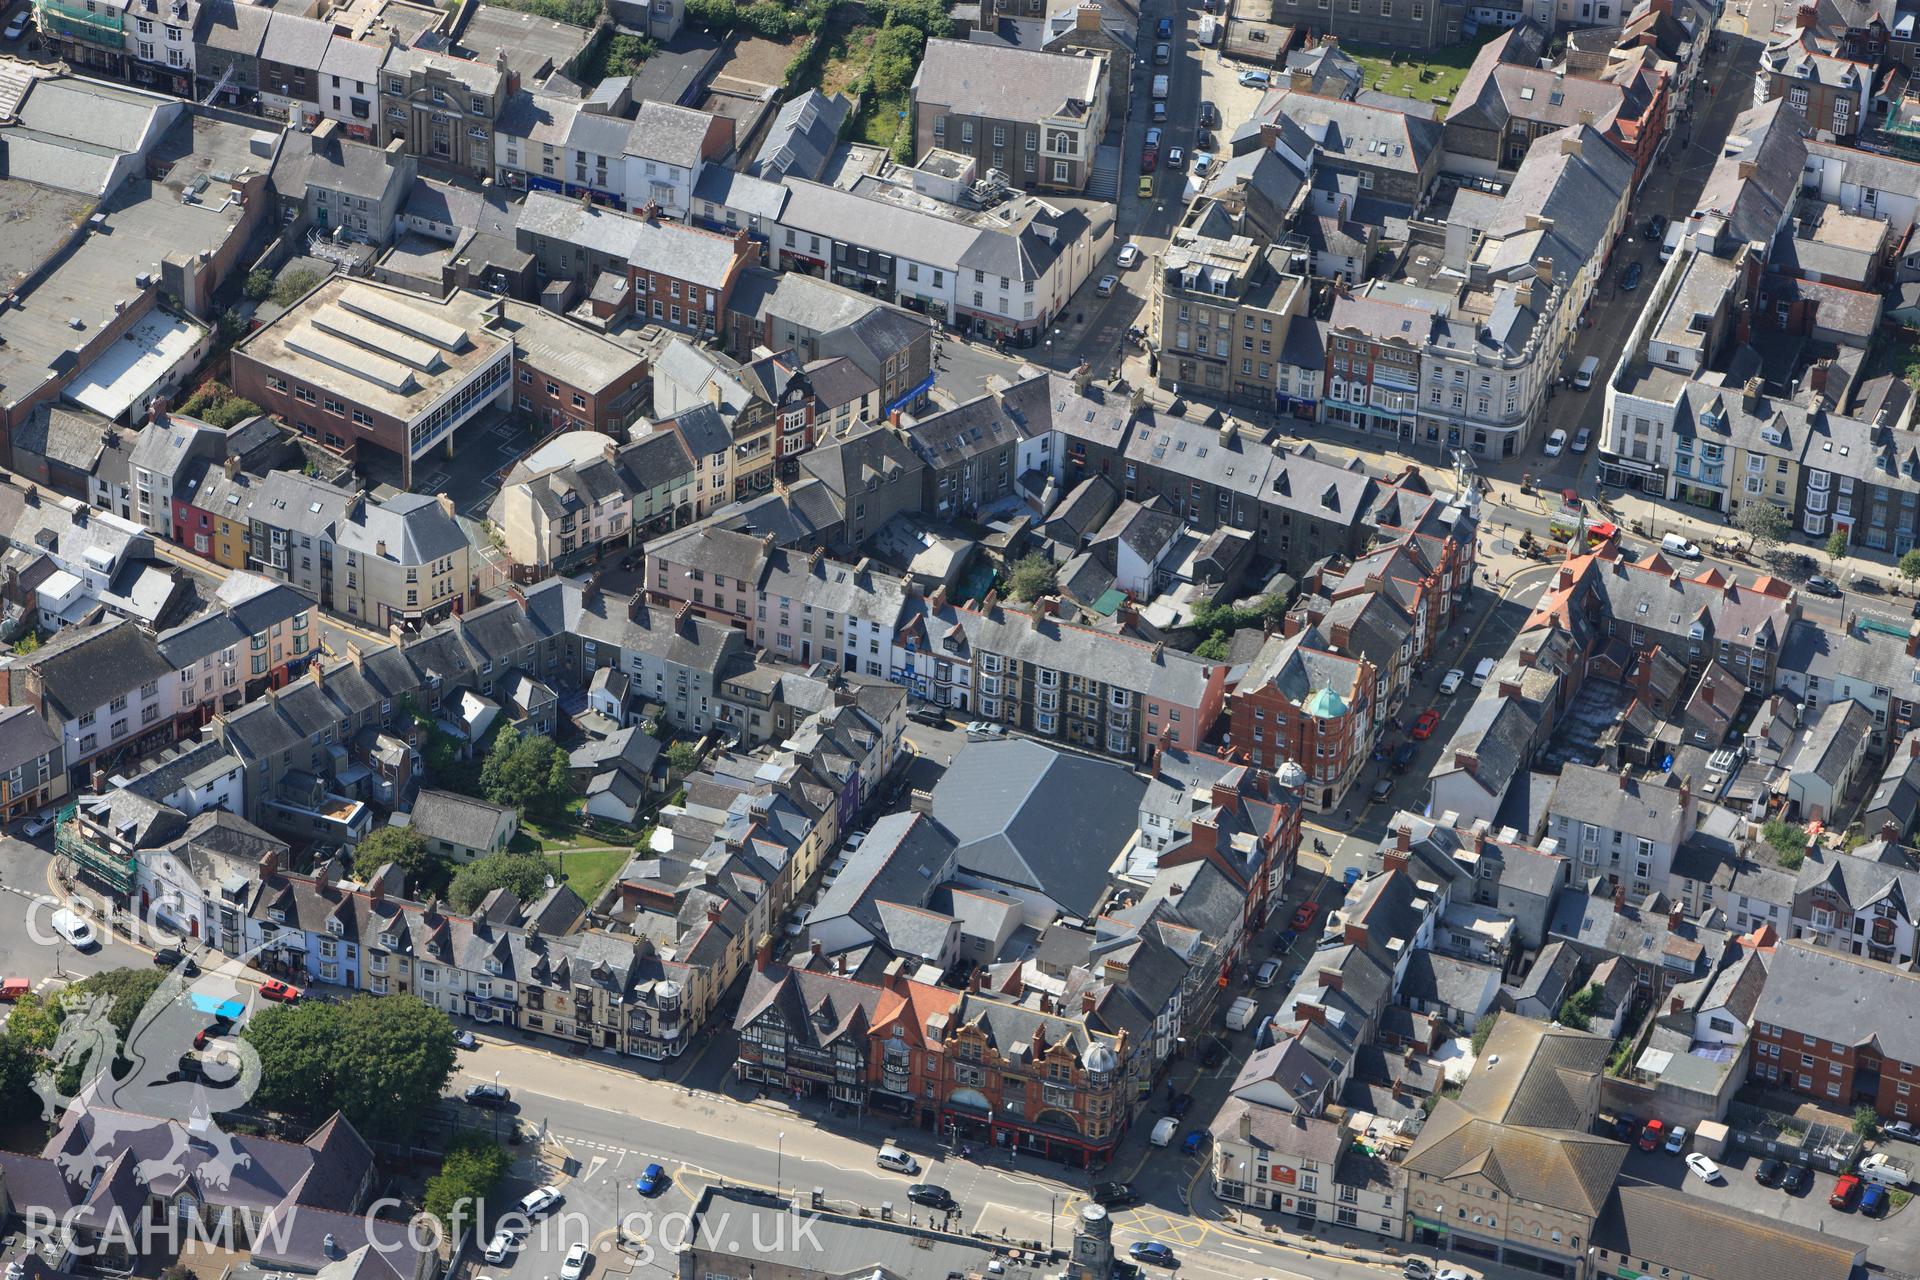 RCAHMW colour oblique photograph of Aberystwyth. Taken by Toby Driver and Oliver Davies on 28/06/2011.